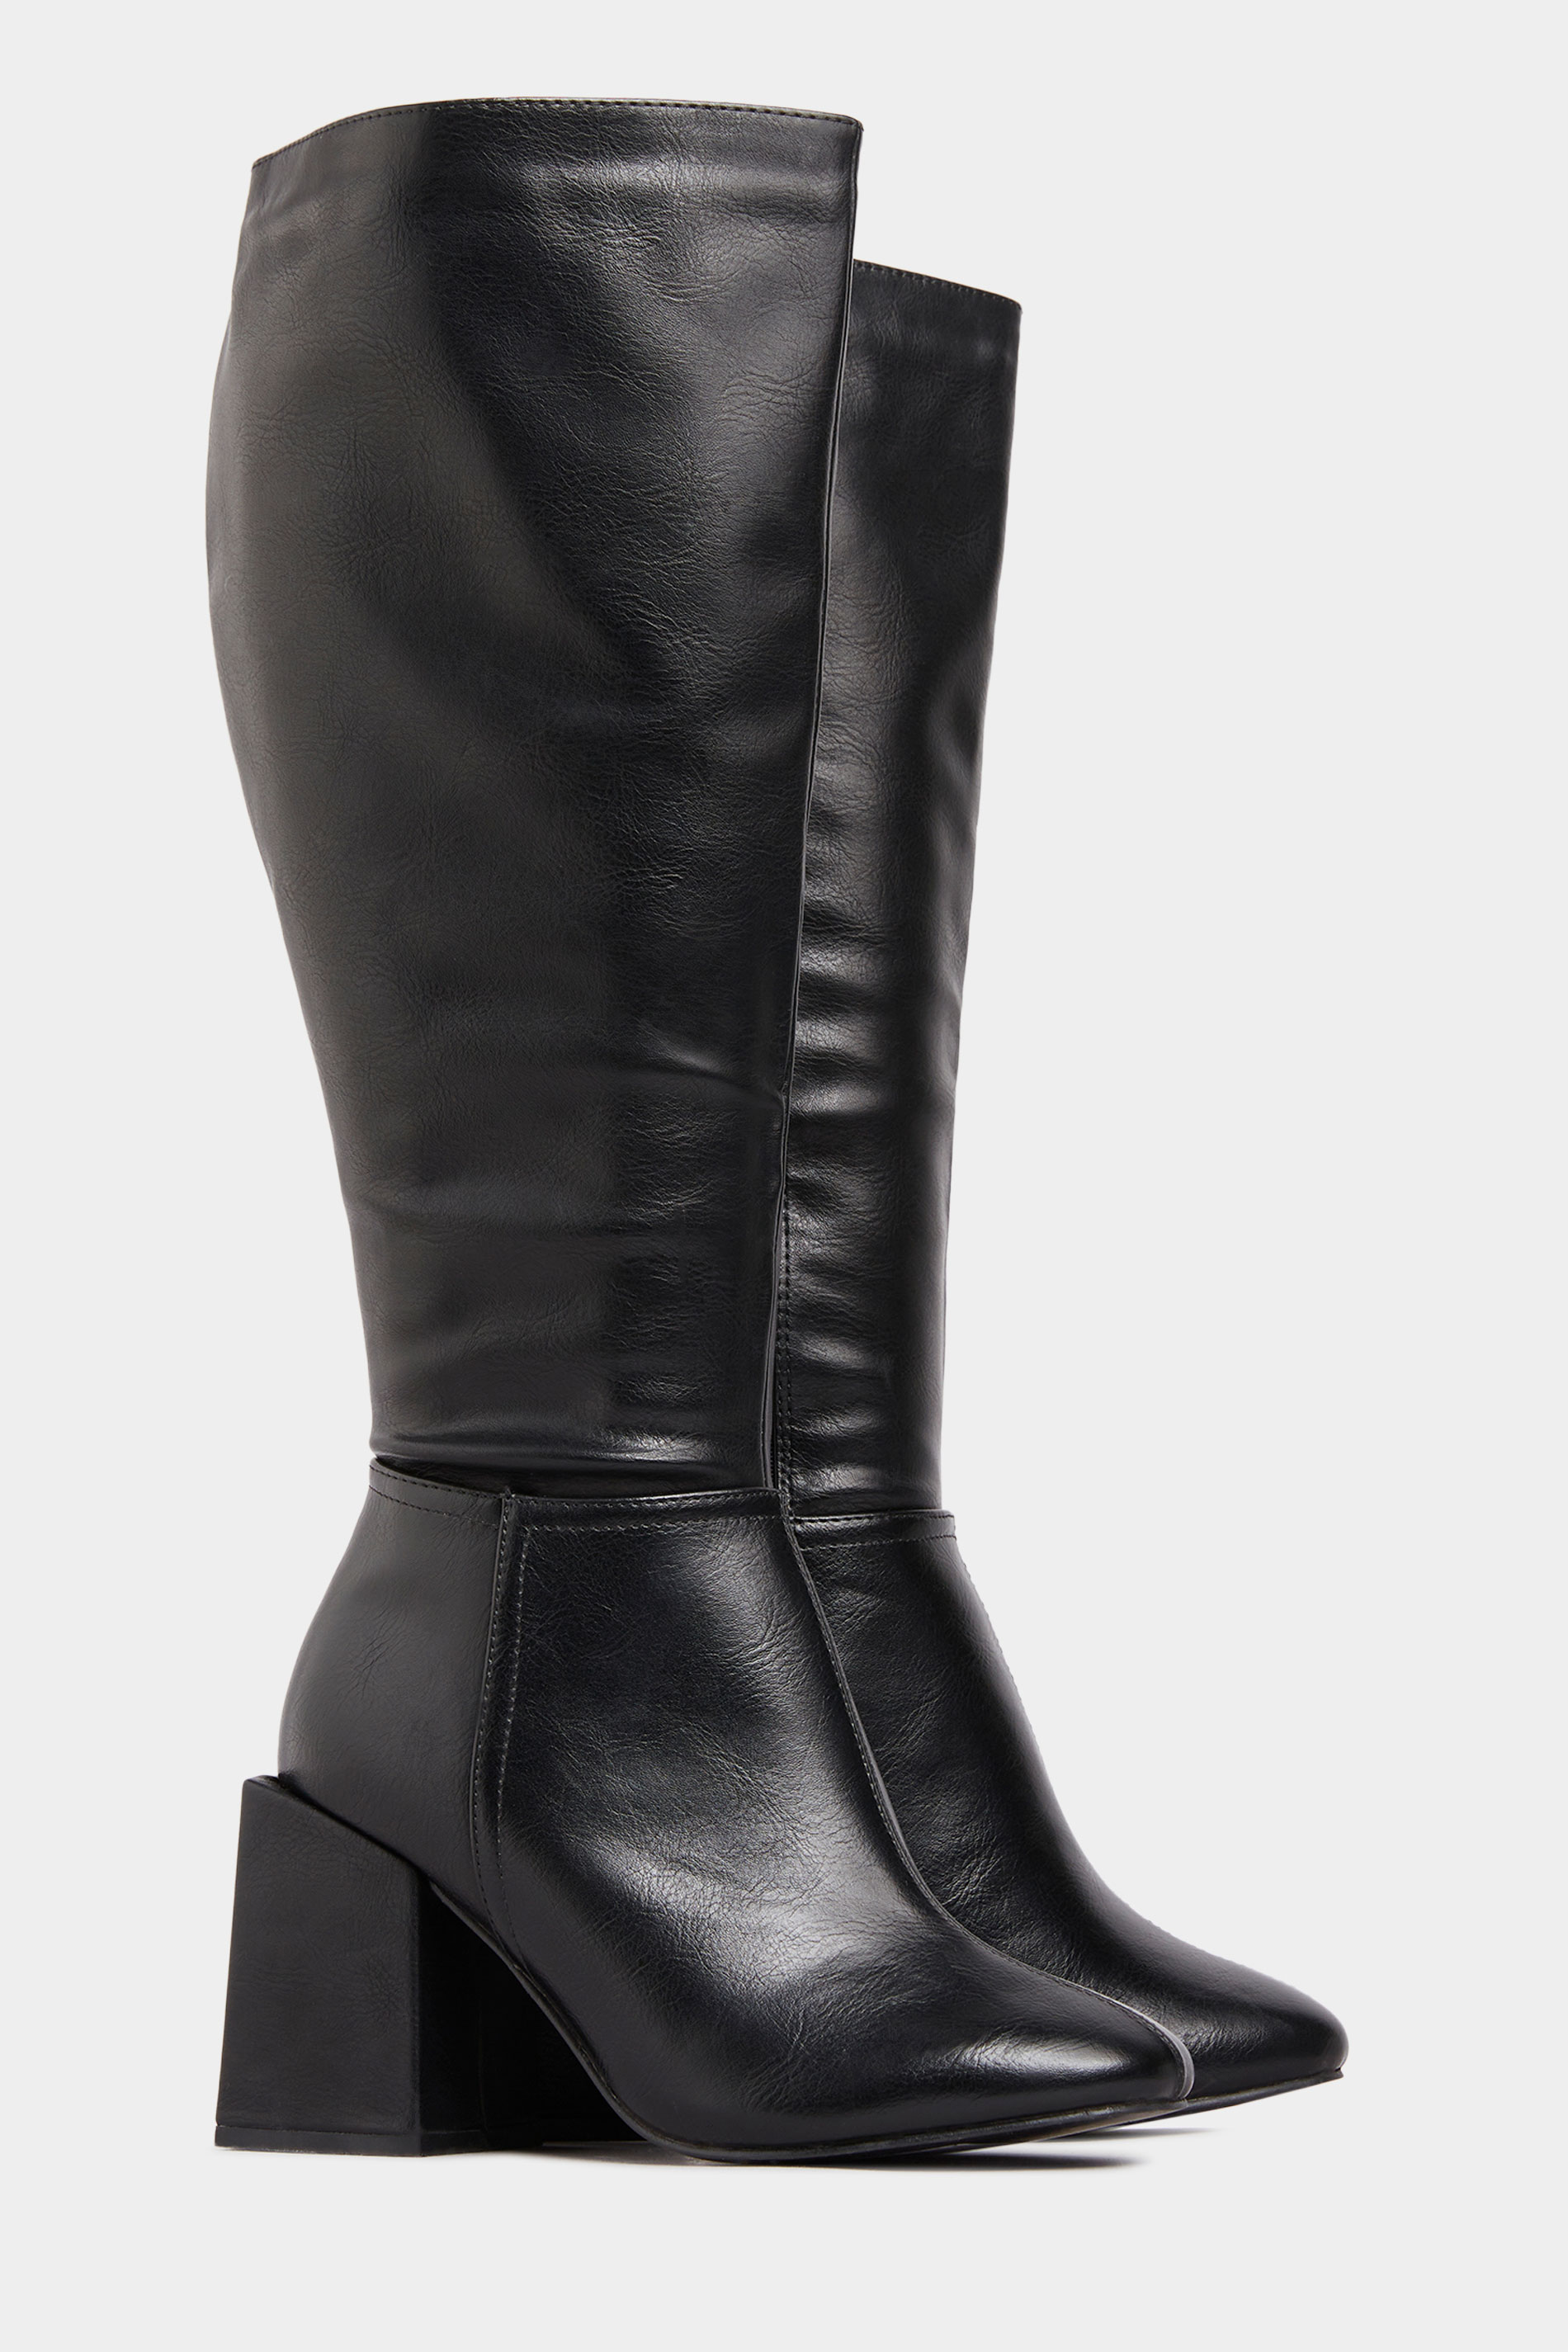 LIMITED COLLECTION Black Vegan Faux Leather Knee High Heeled Boots In Extra Wide Fit 1